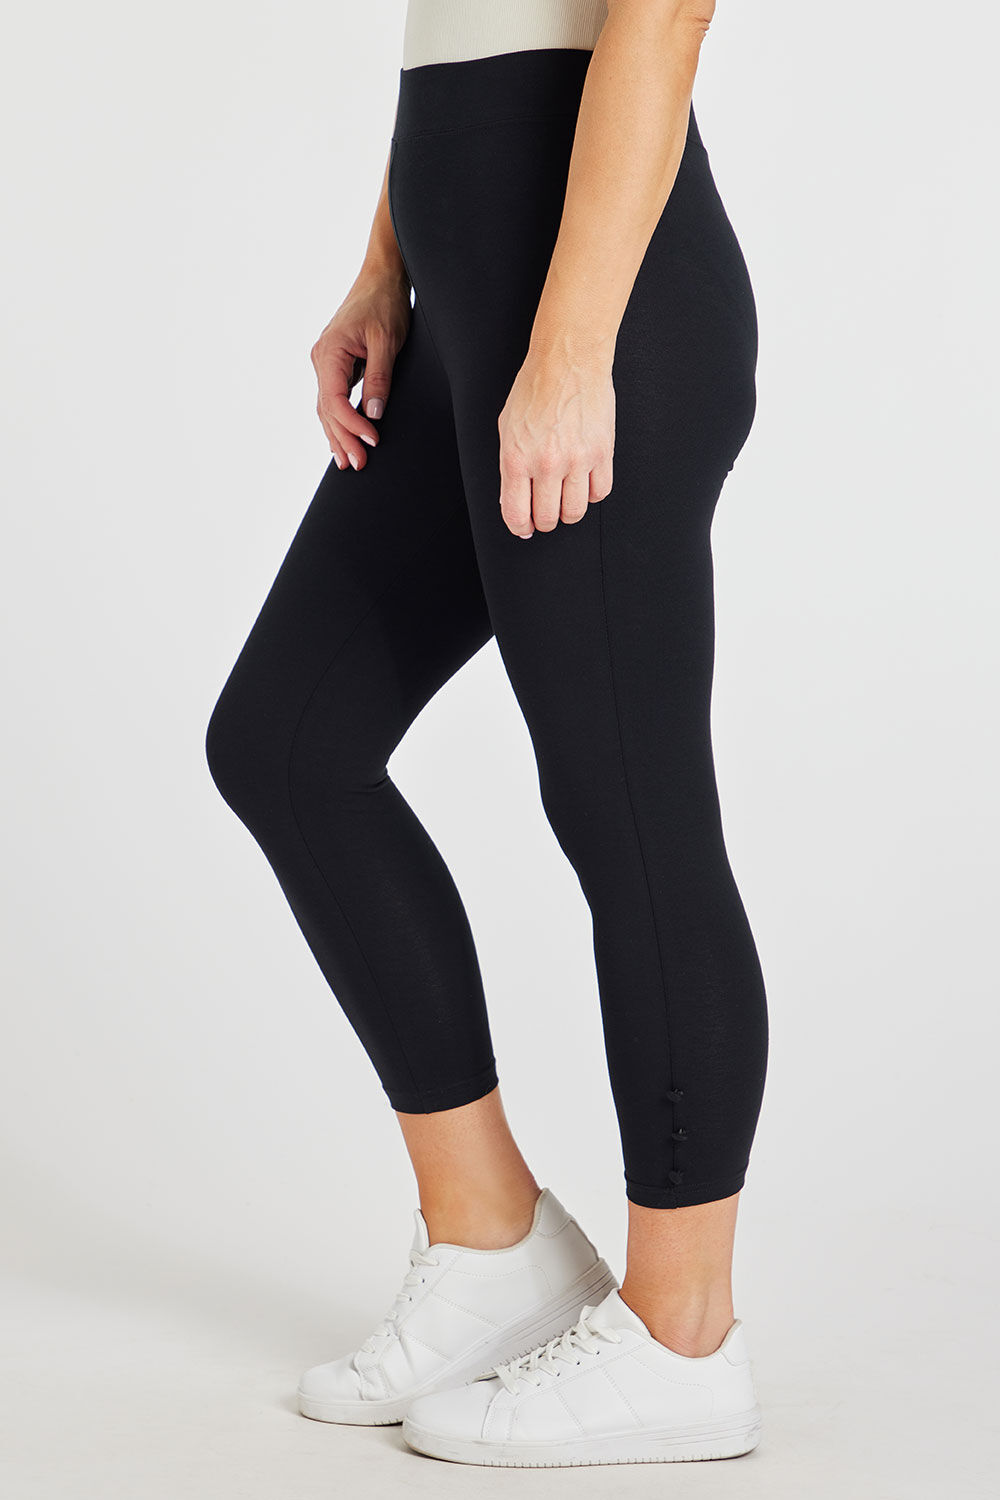 Black Jersey Cropped Legging | Simply Be